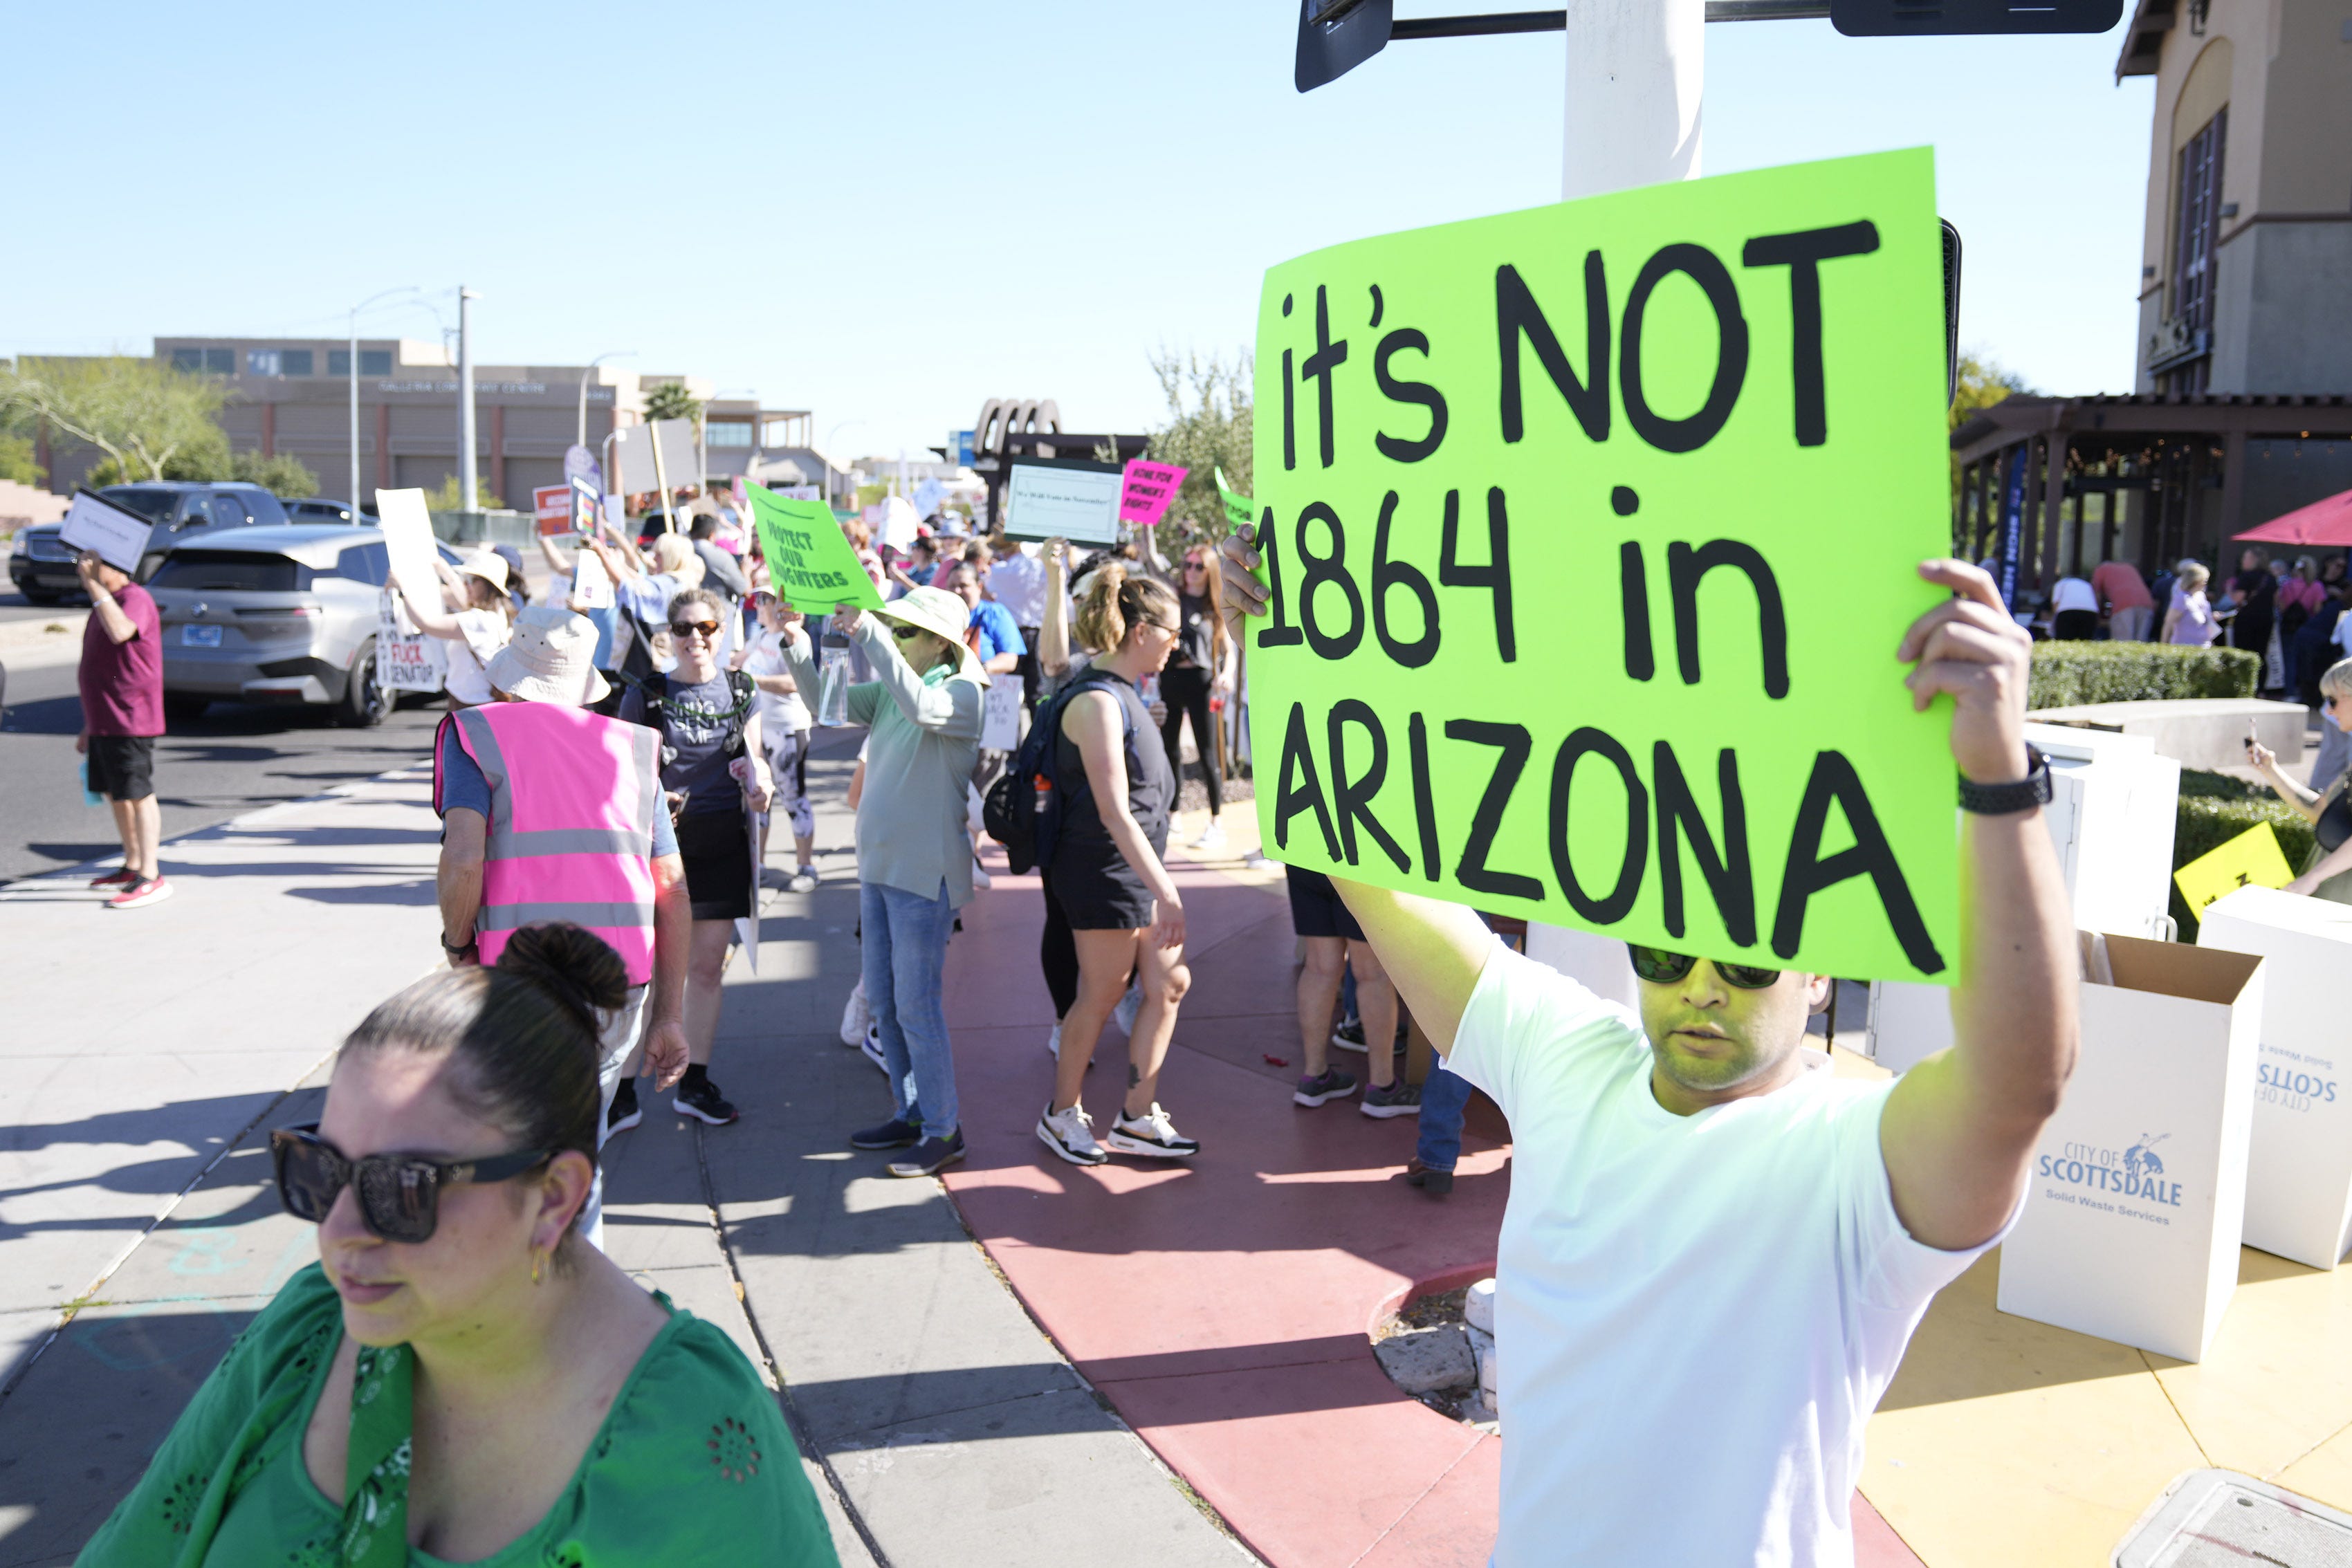 arizona lawmakers appear poised to try to overturn 1864 abortion ban. but will it happen?